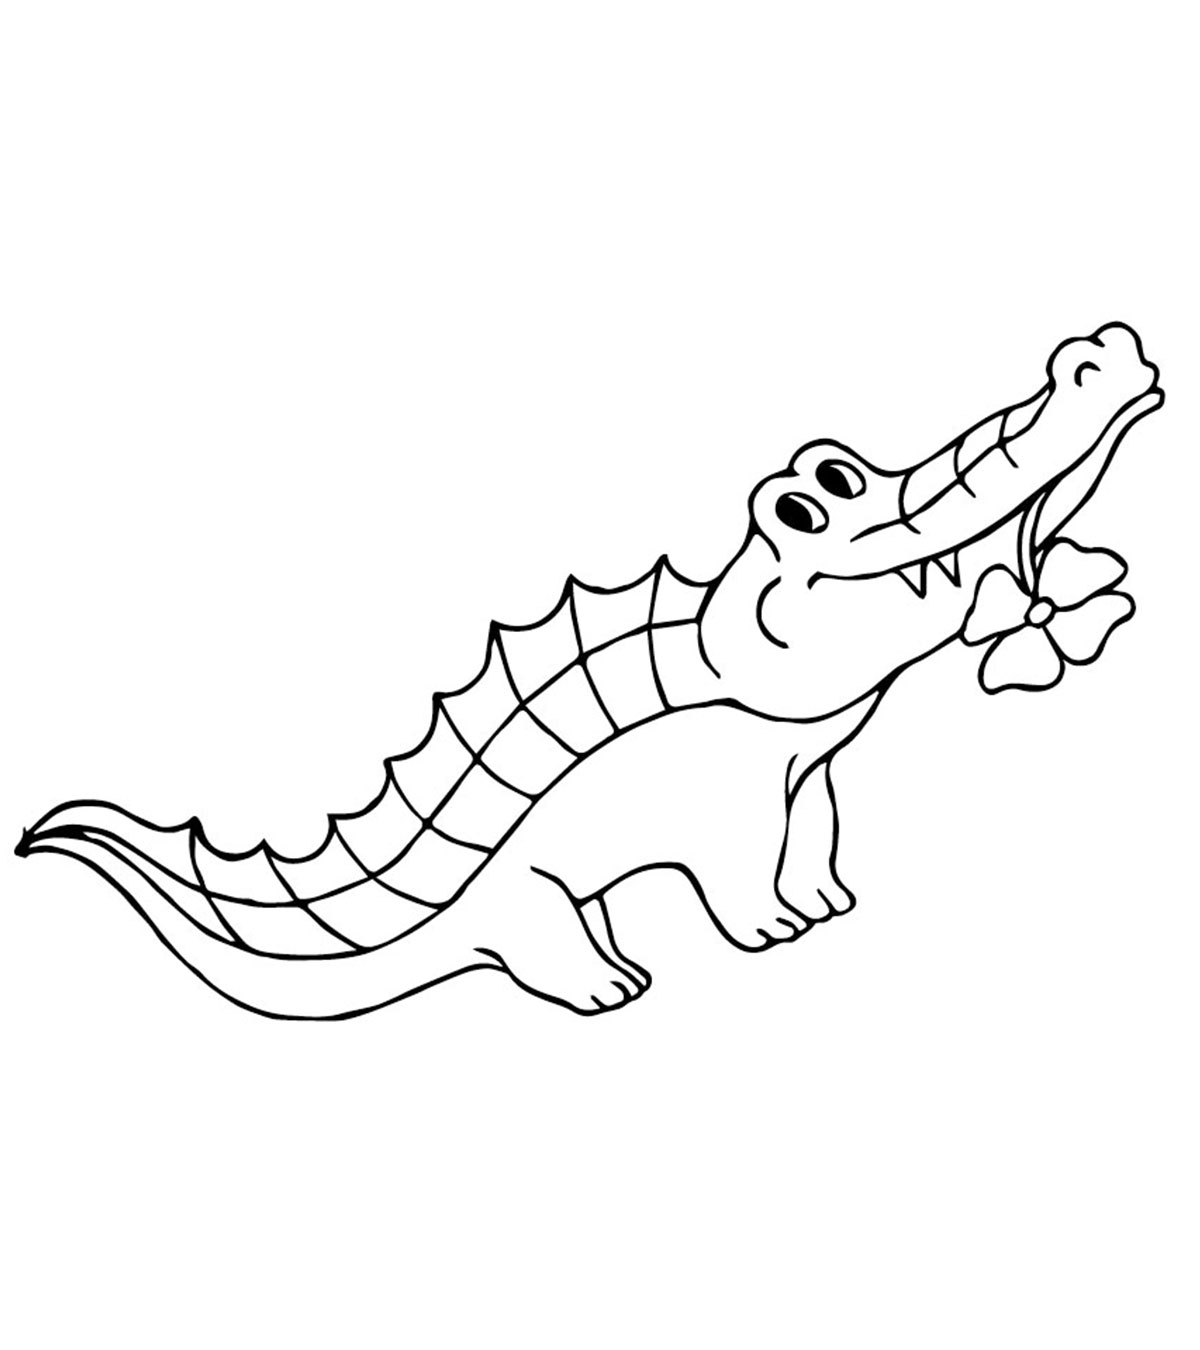 Top 25 Alligator Coloring Pages Your Toddler Will Love To Color